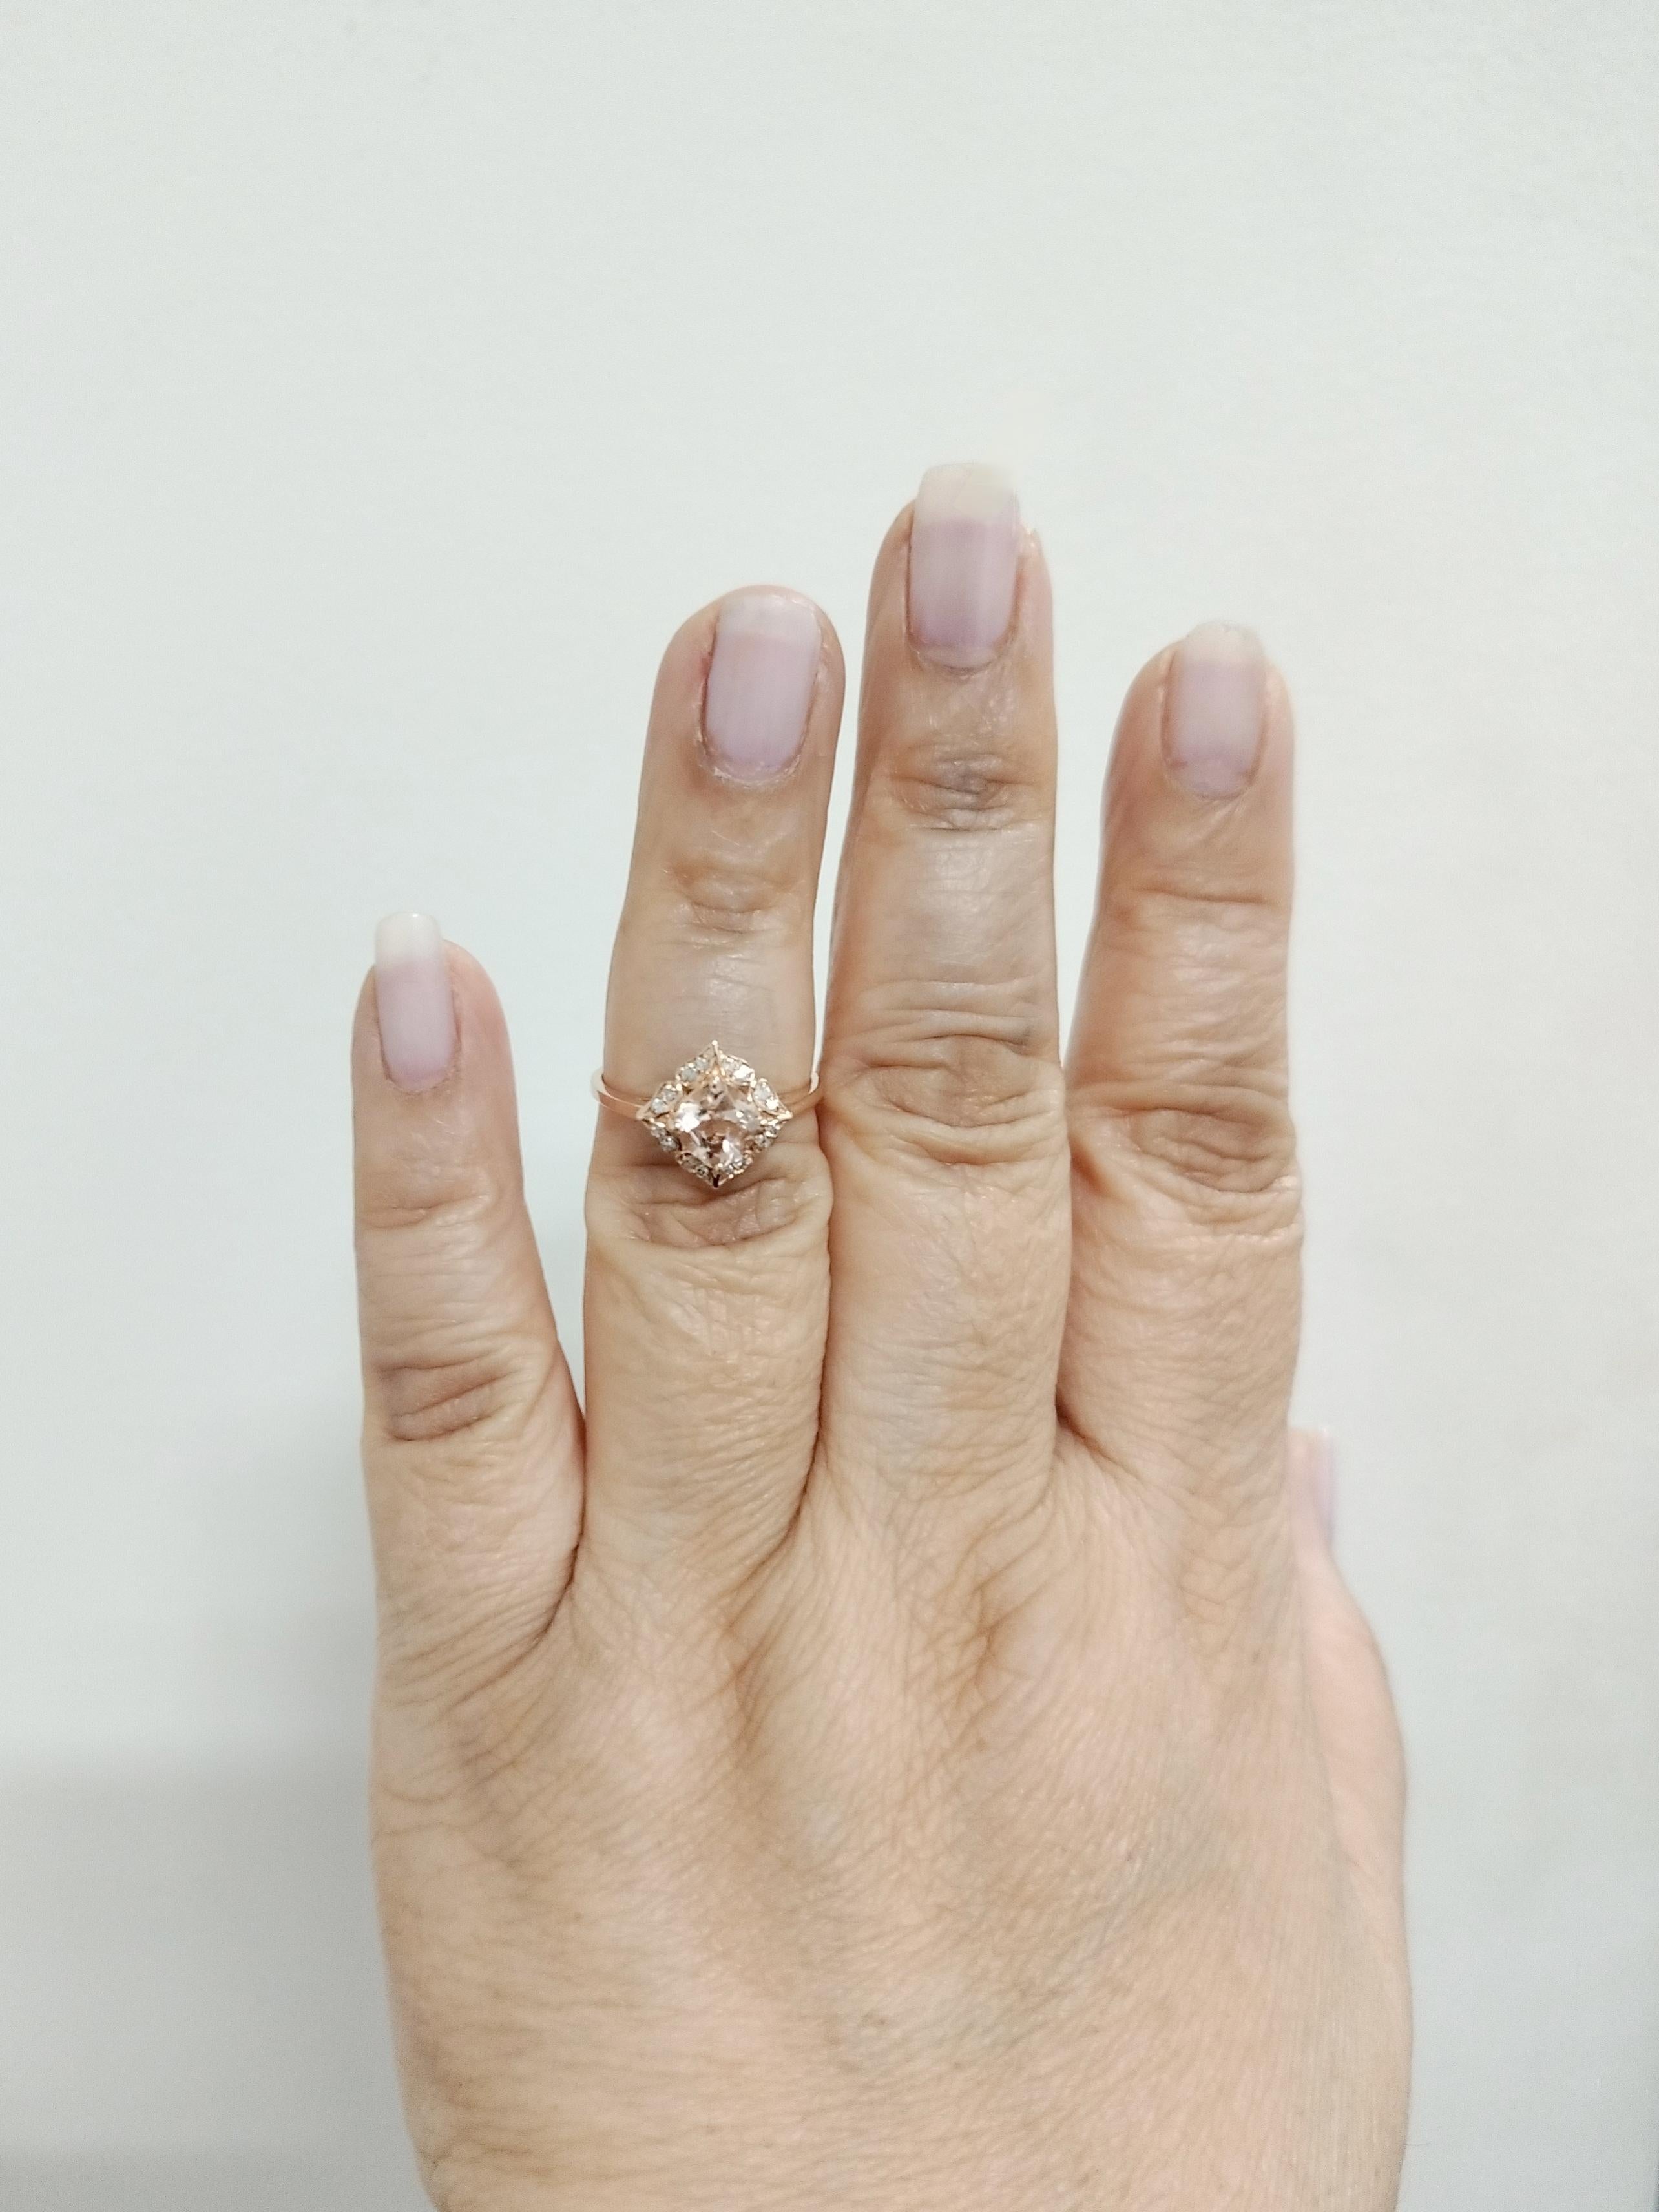 Beautiful 1.00 ct. morganite square cushion with 0.10 ct. good quality white diamond rounds.  Handmade in 14k rose gold.  Ring size 7.